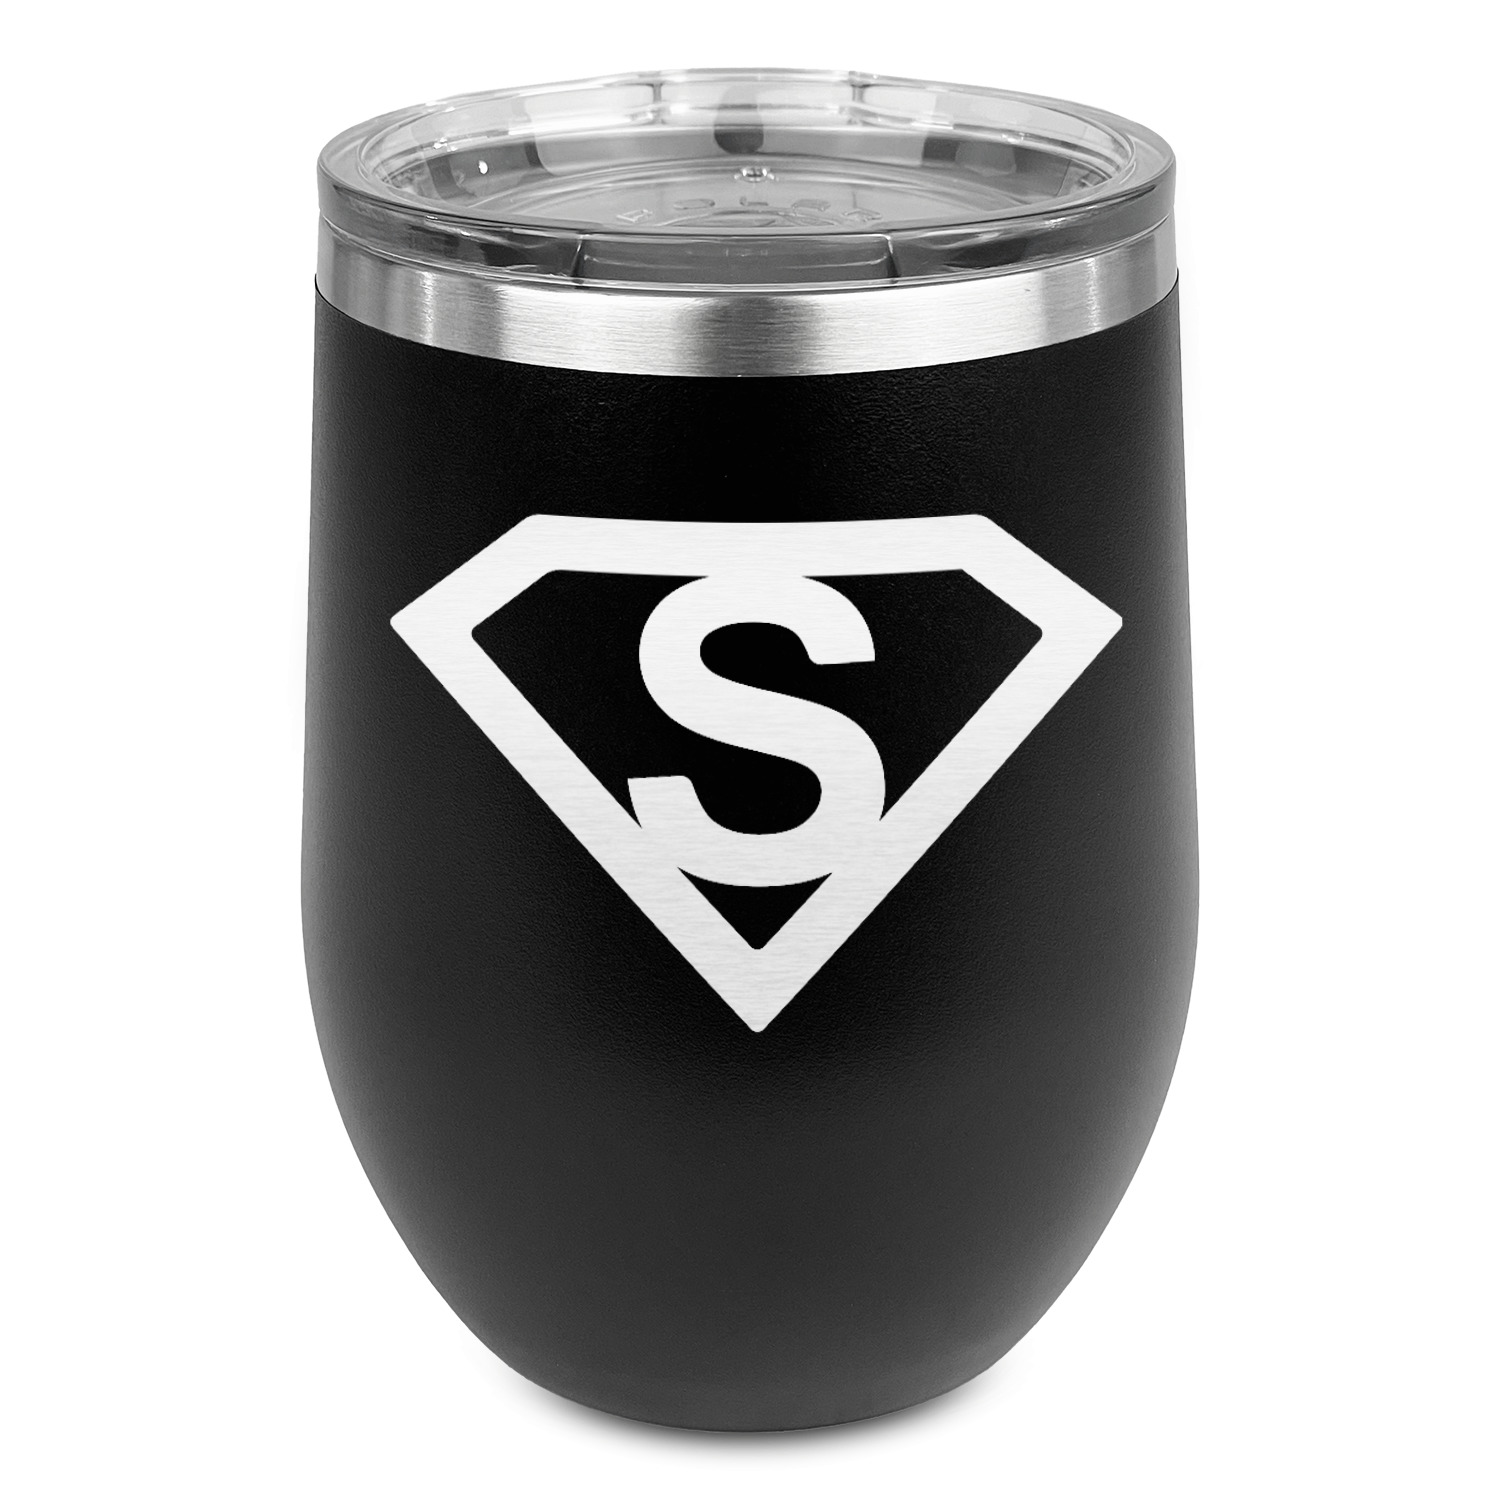 Hand Engraving Letters on a YETI Tumbler 